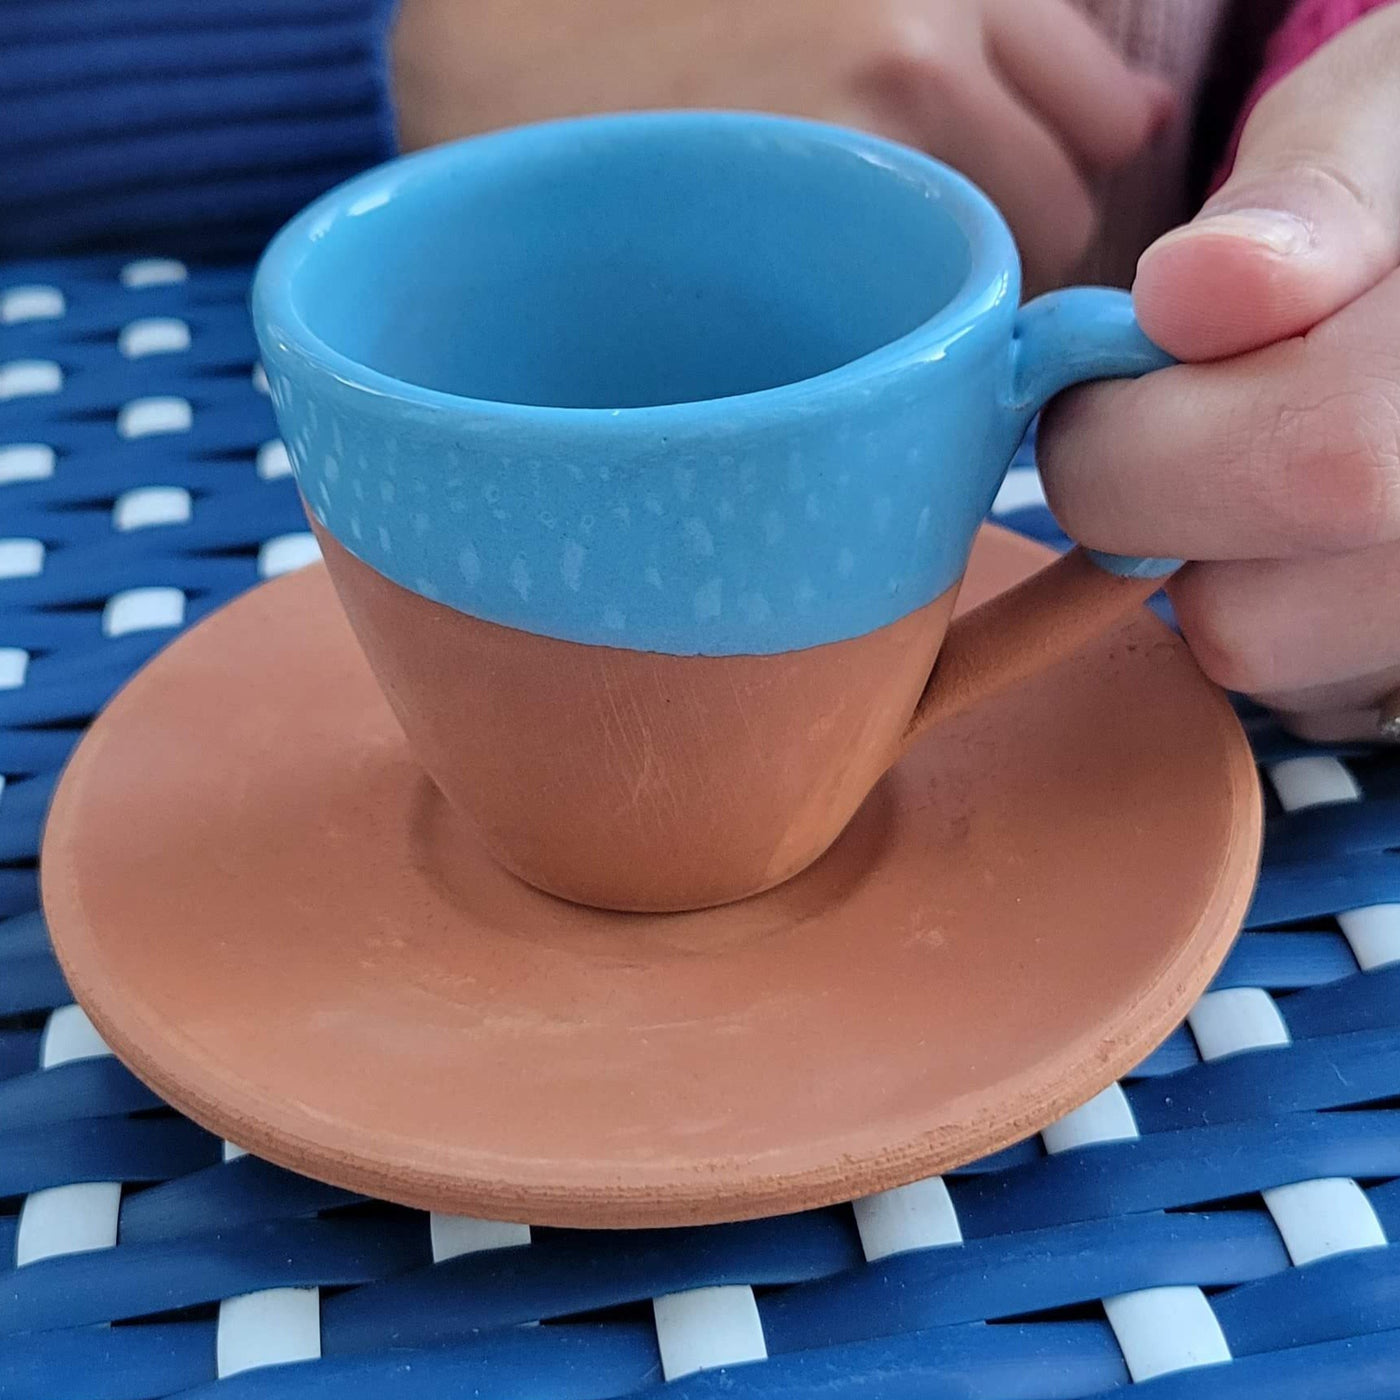 espresso cup and saucer set dipped in blue